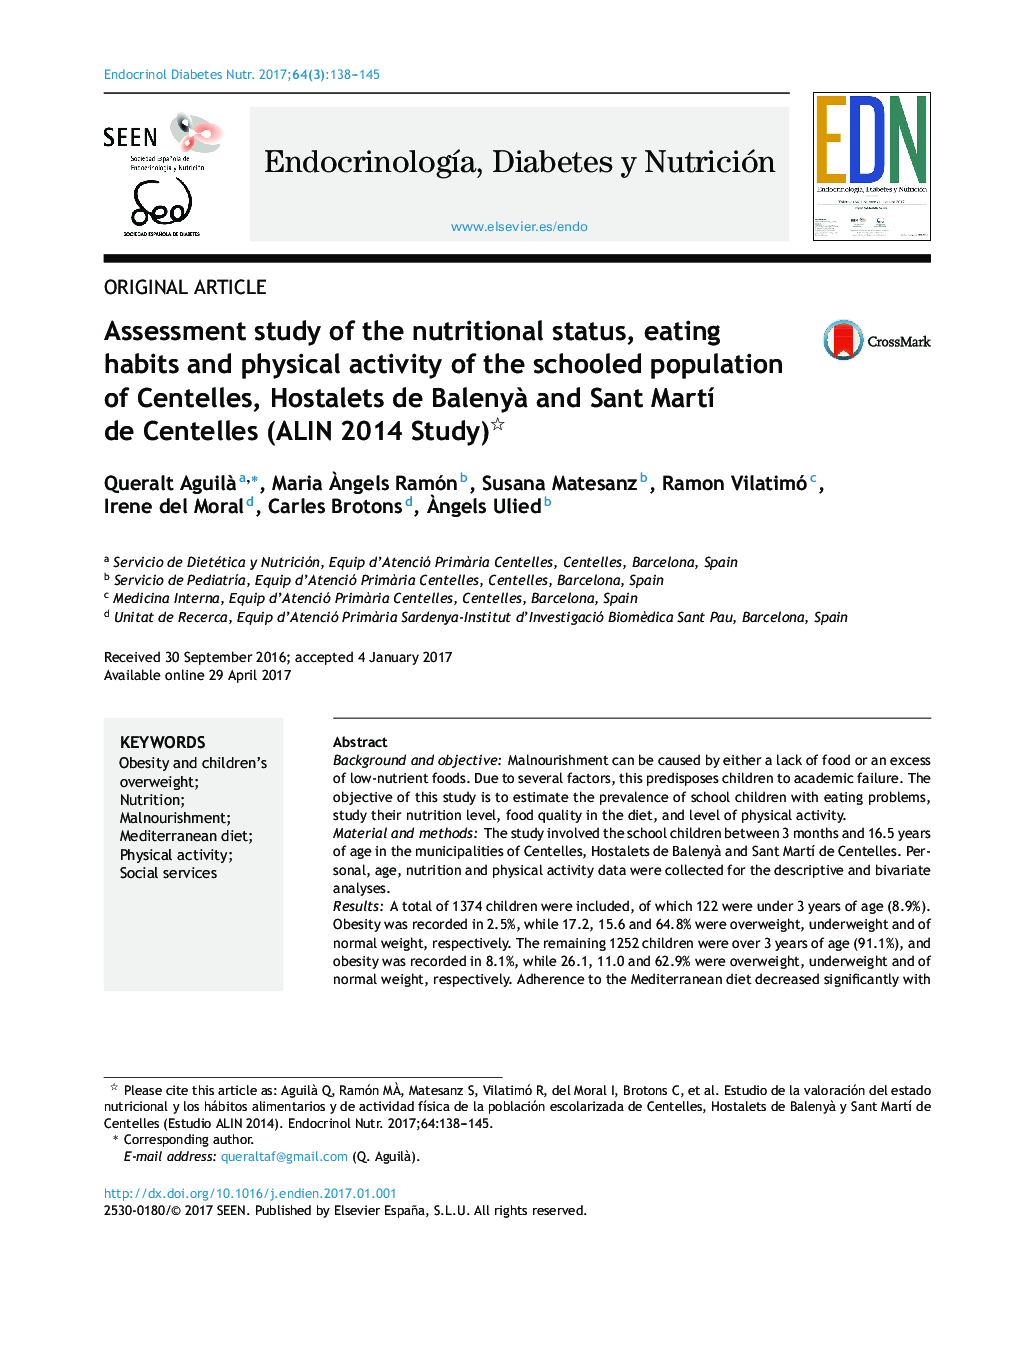 Assessment study of the nutritional status, eating habits and physical activity of the schooled population of Centelles, Hostalets de BalenyÃ  and Sant MartÃ­ de Centelles (ALIN 2014 Study)